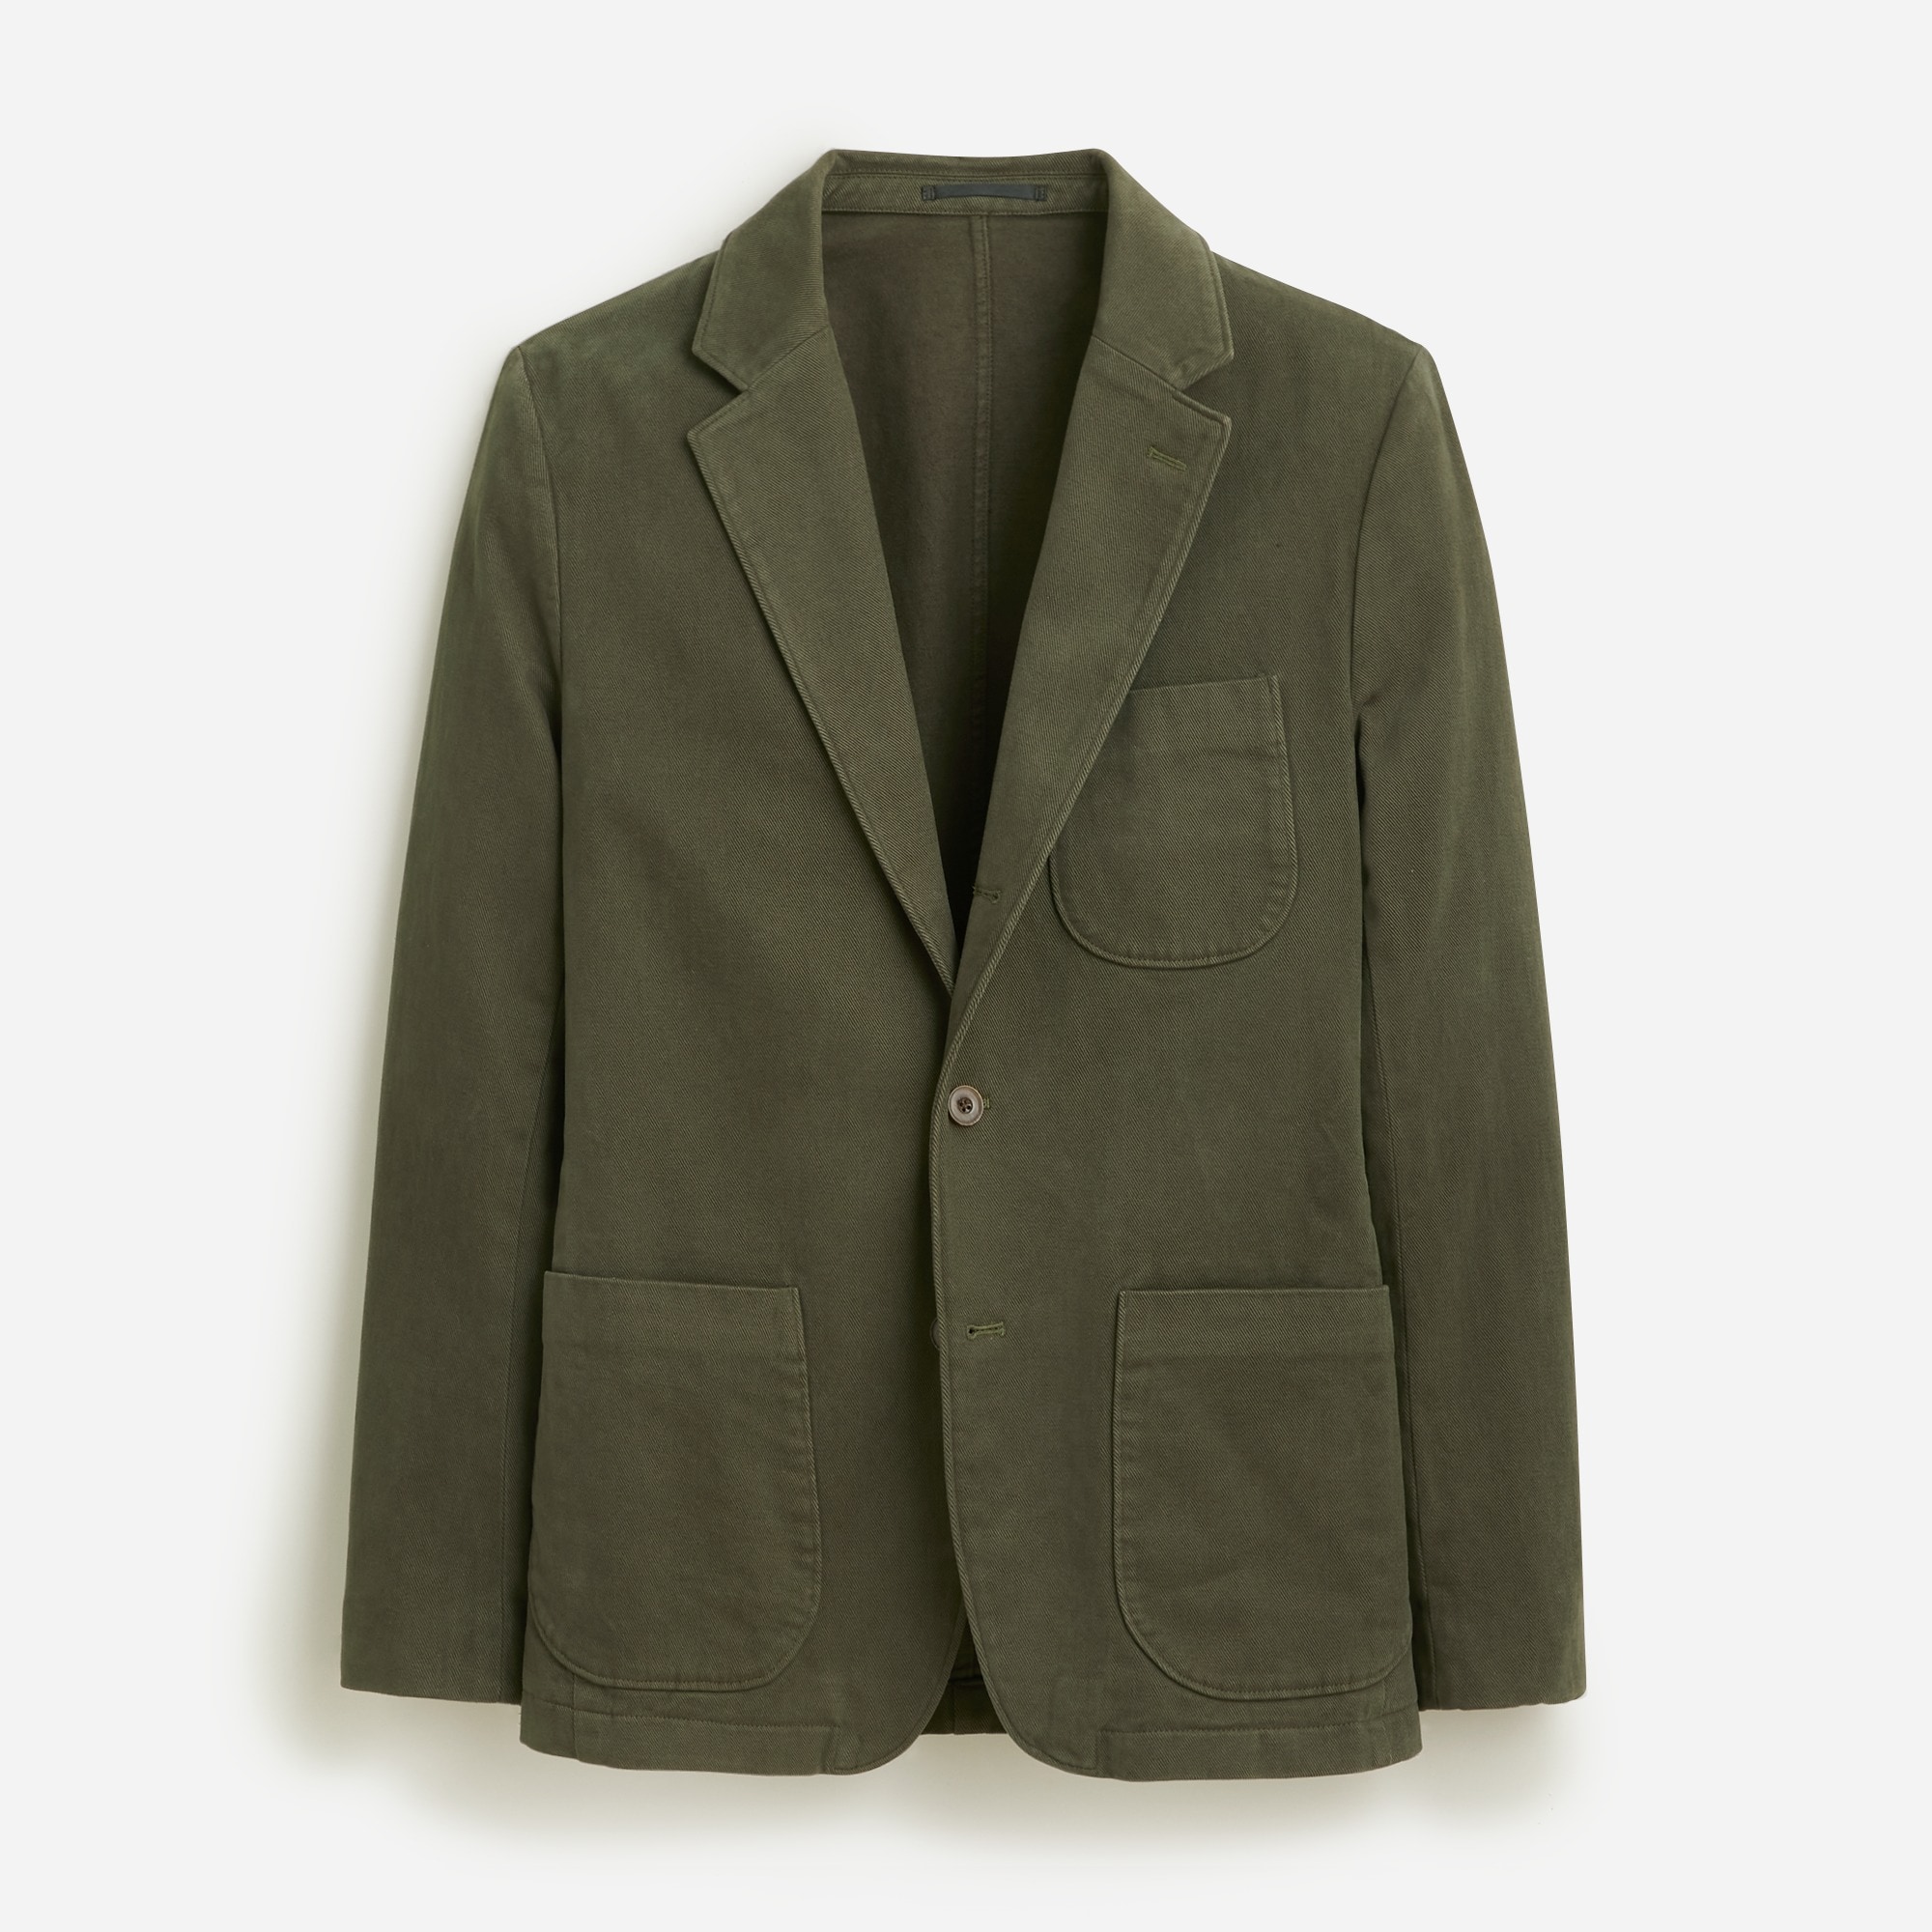  Garment-dyed suit jacket in Italian cotton drill